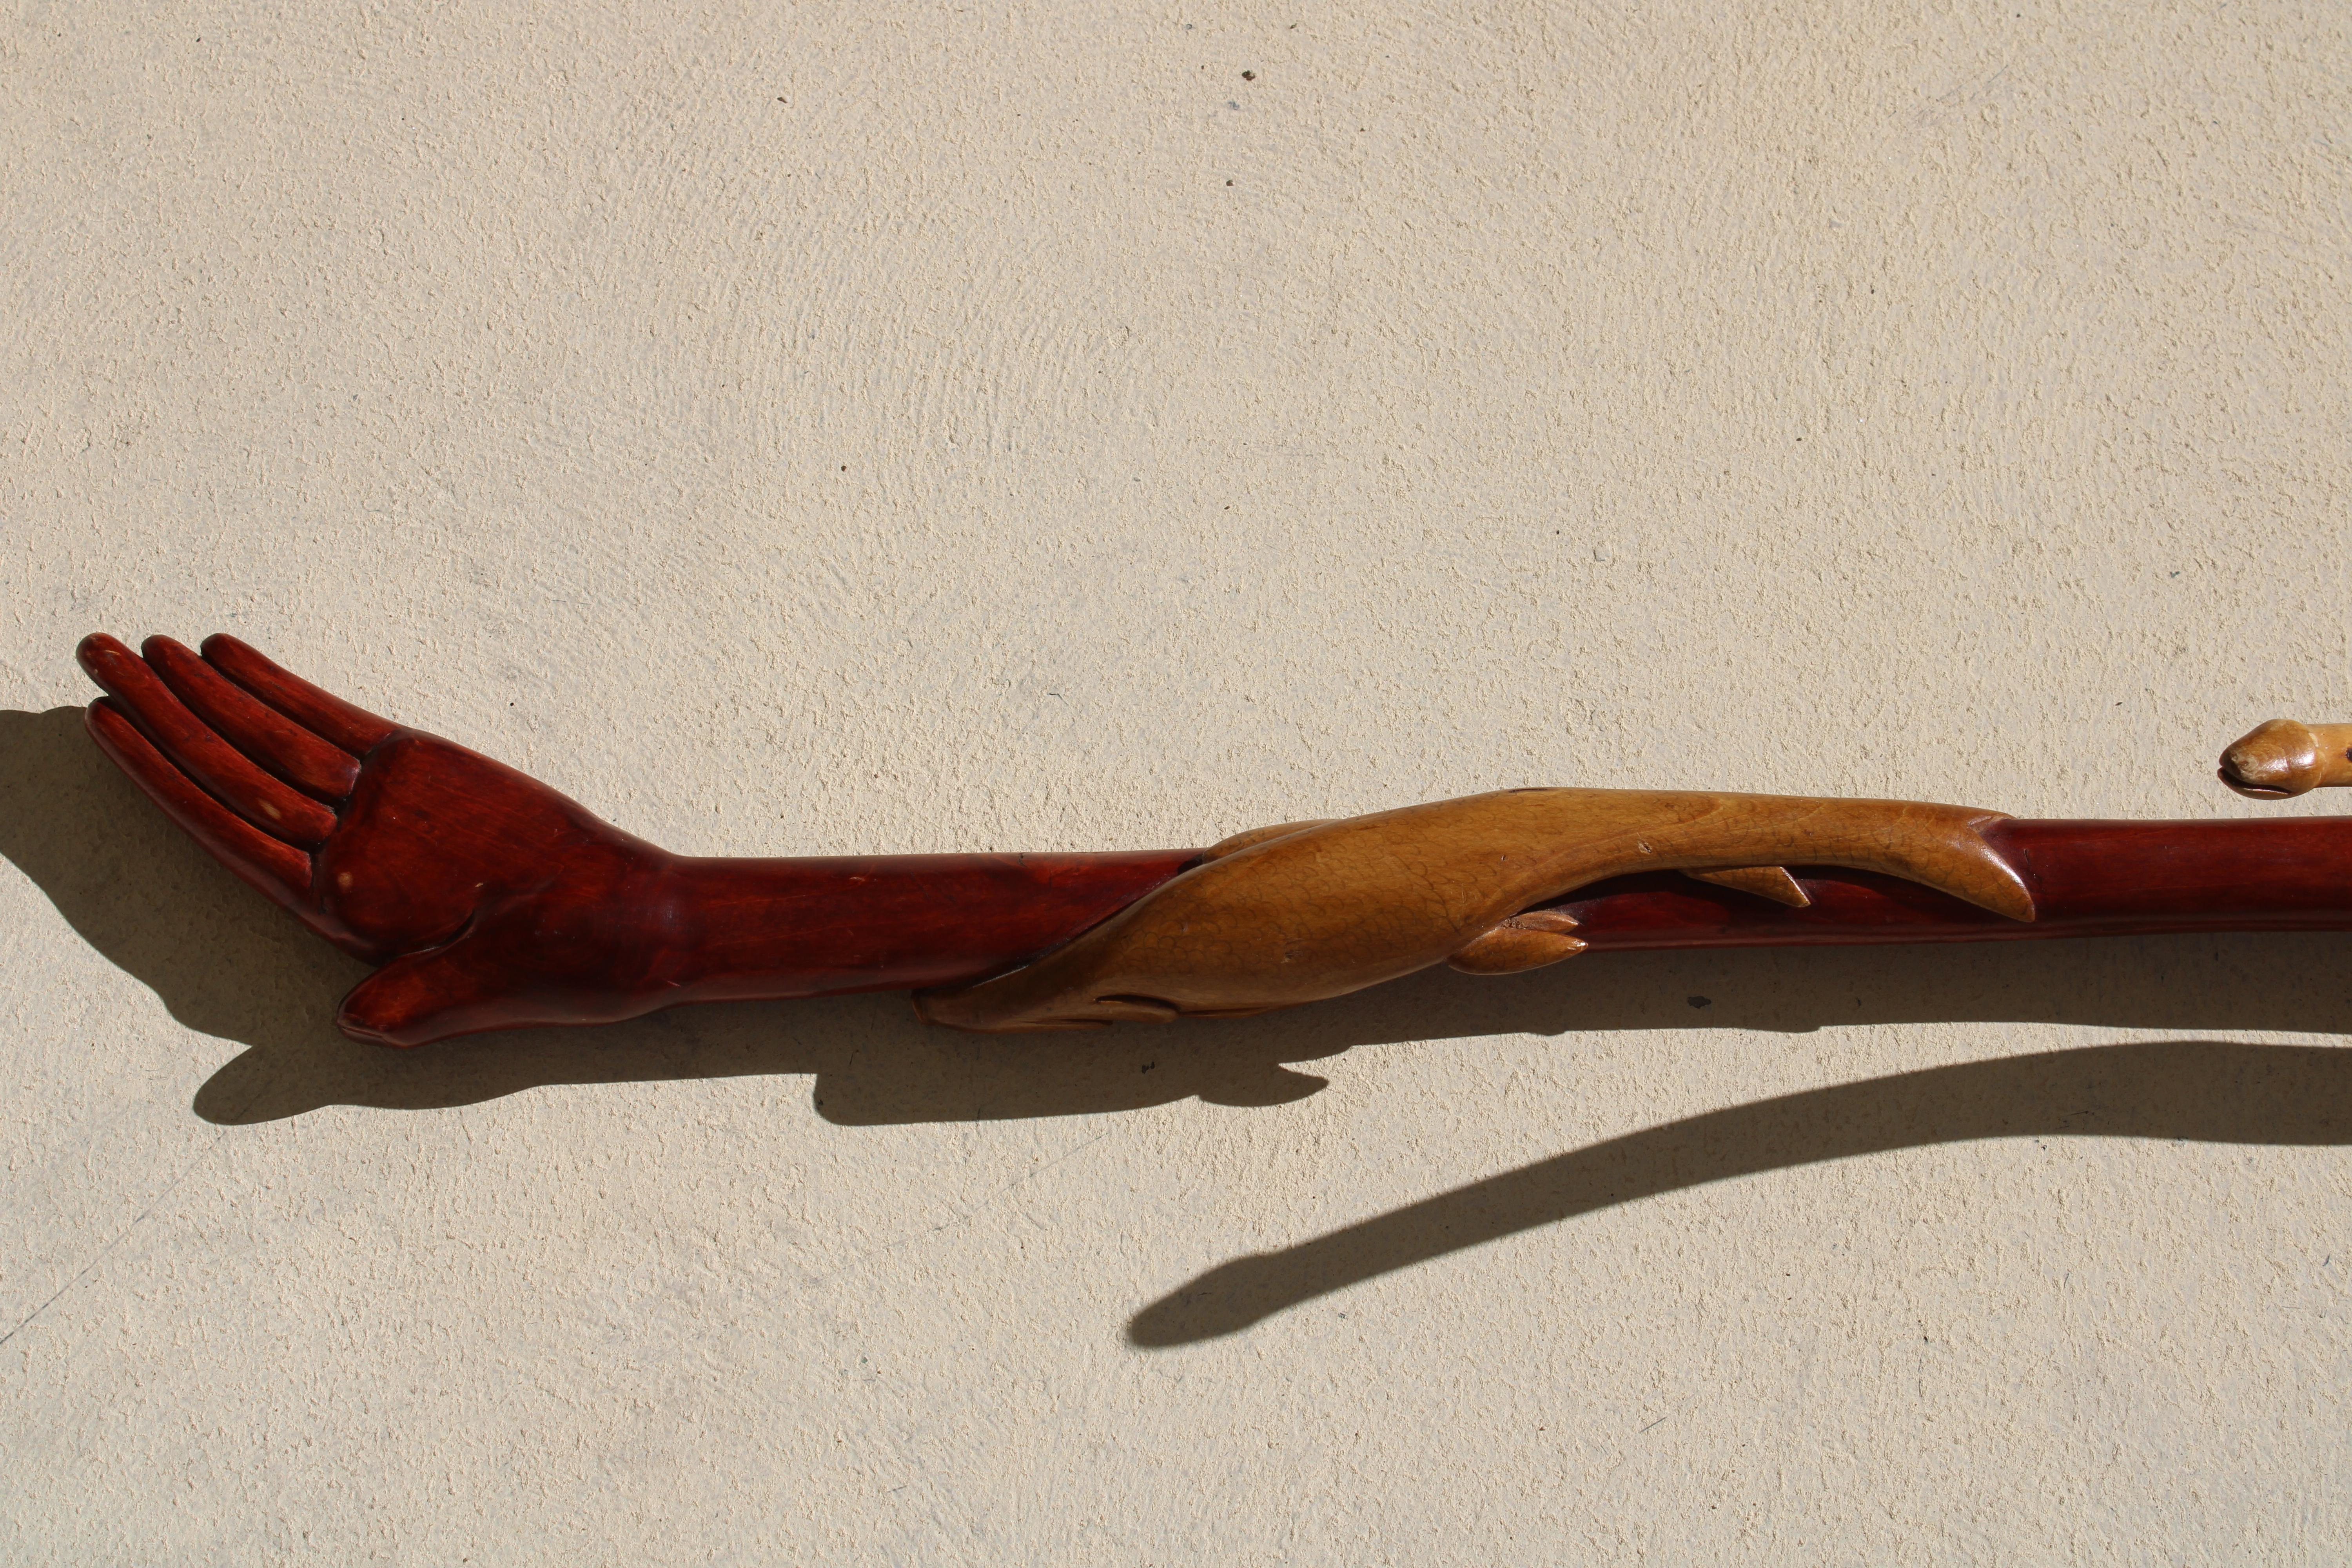 Folk Art carved walking cane with hand, 2 snakes and fish. Cane measures 7